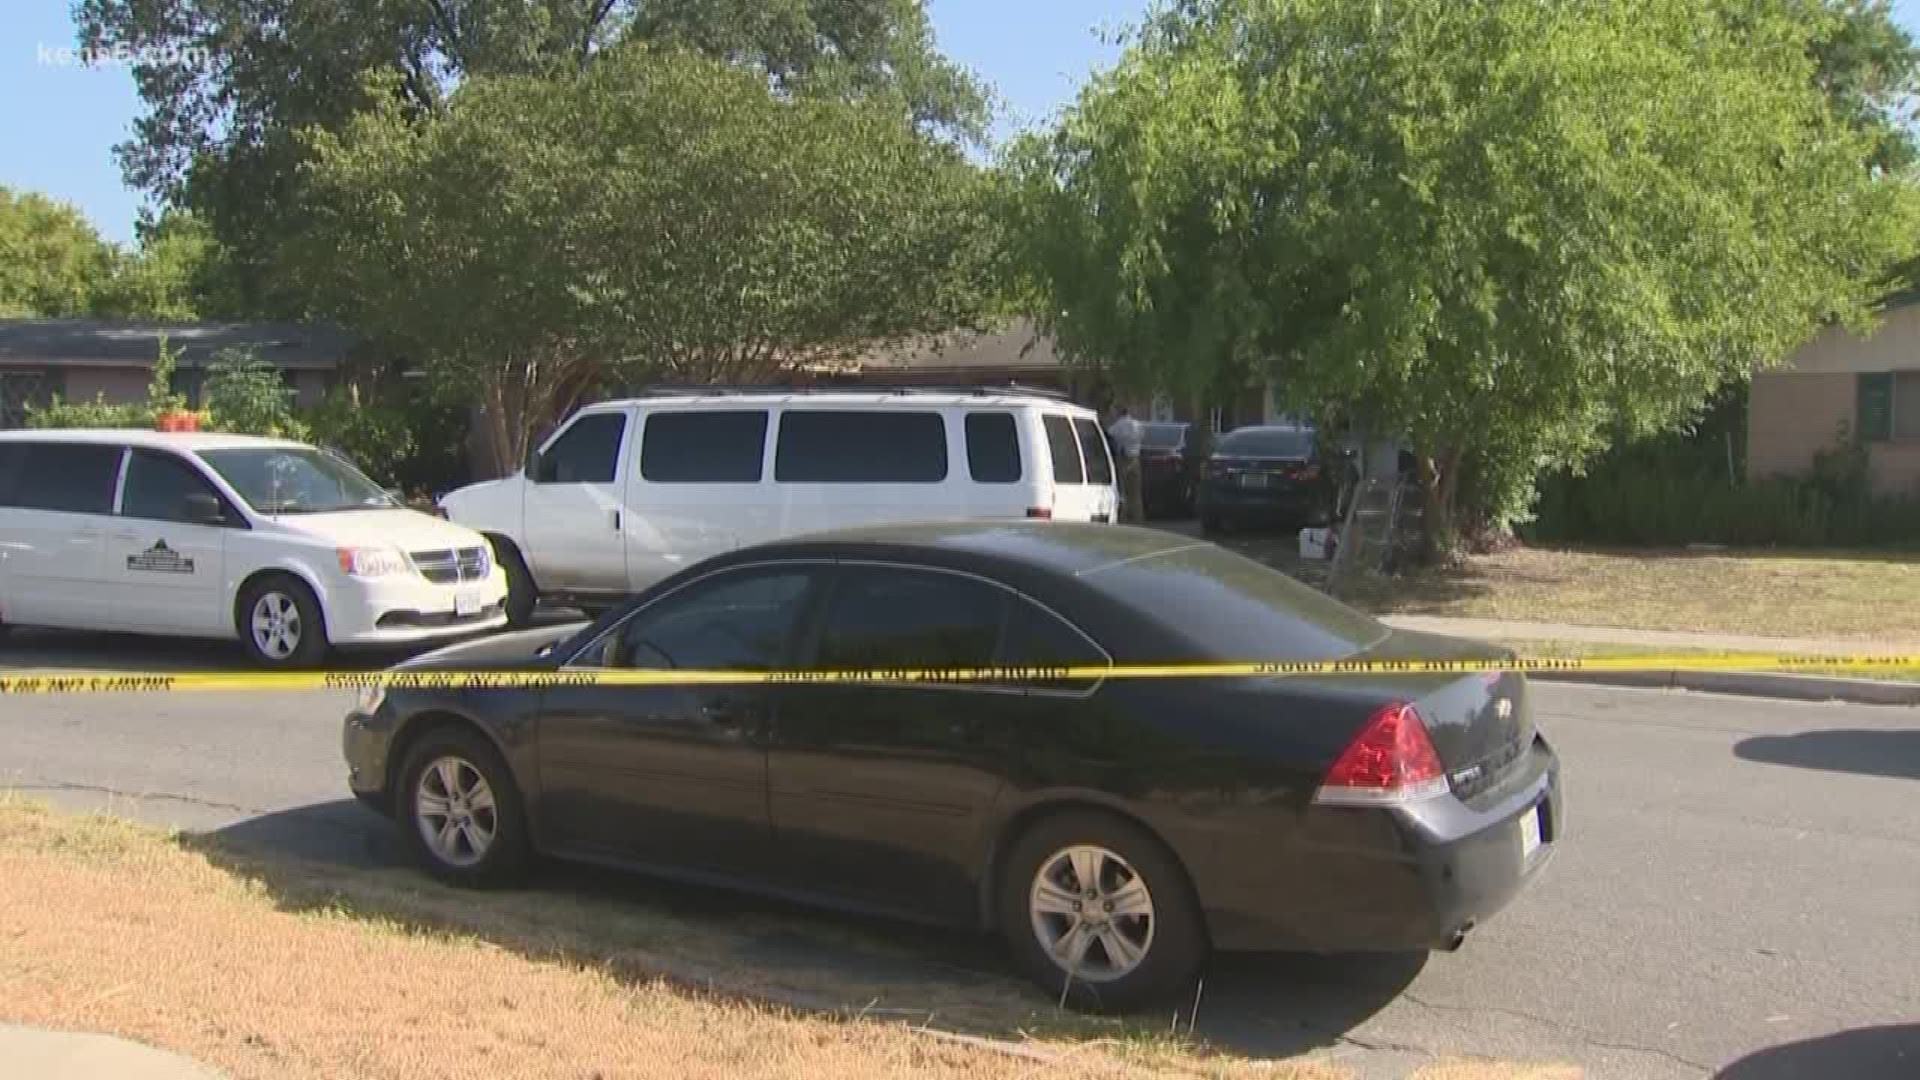 The desiccated remains of a baby were located Tuesday inside of what Bexar County deputies are calling a "drug house" in west San Antonio.